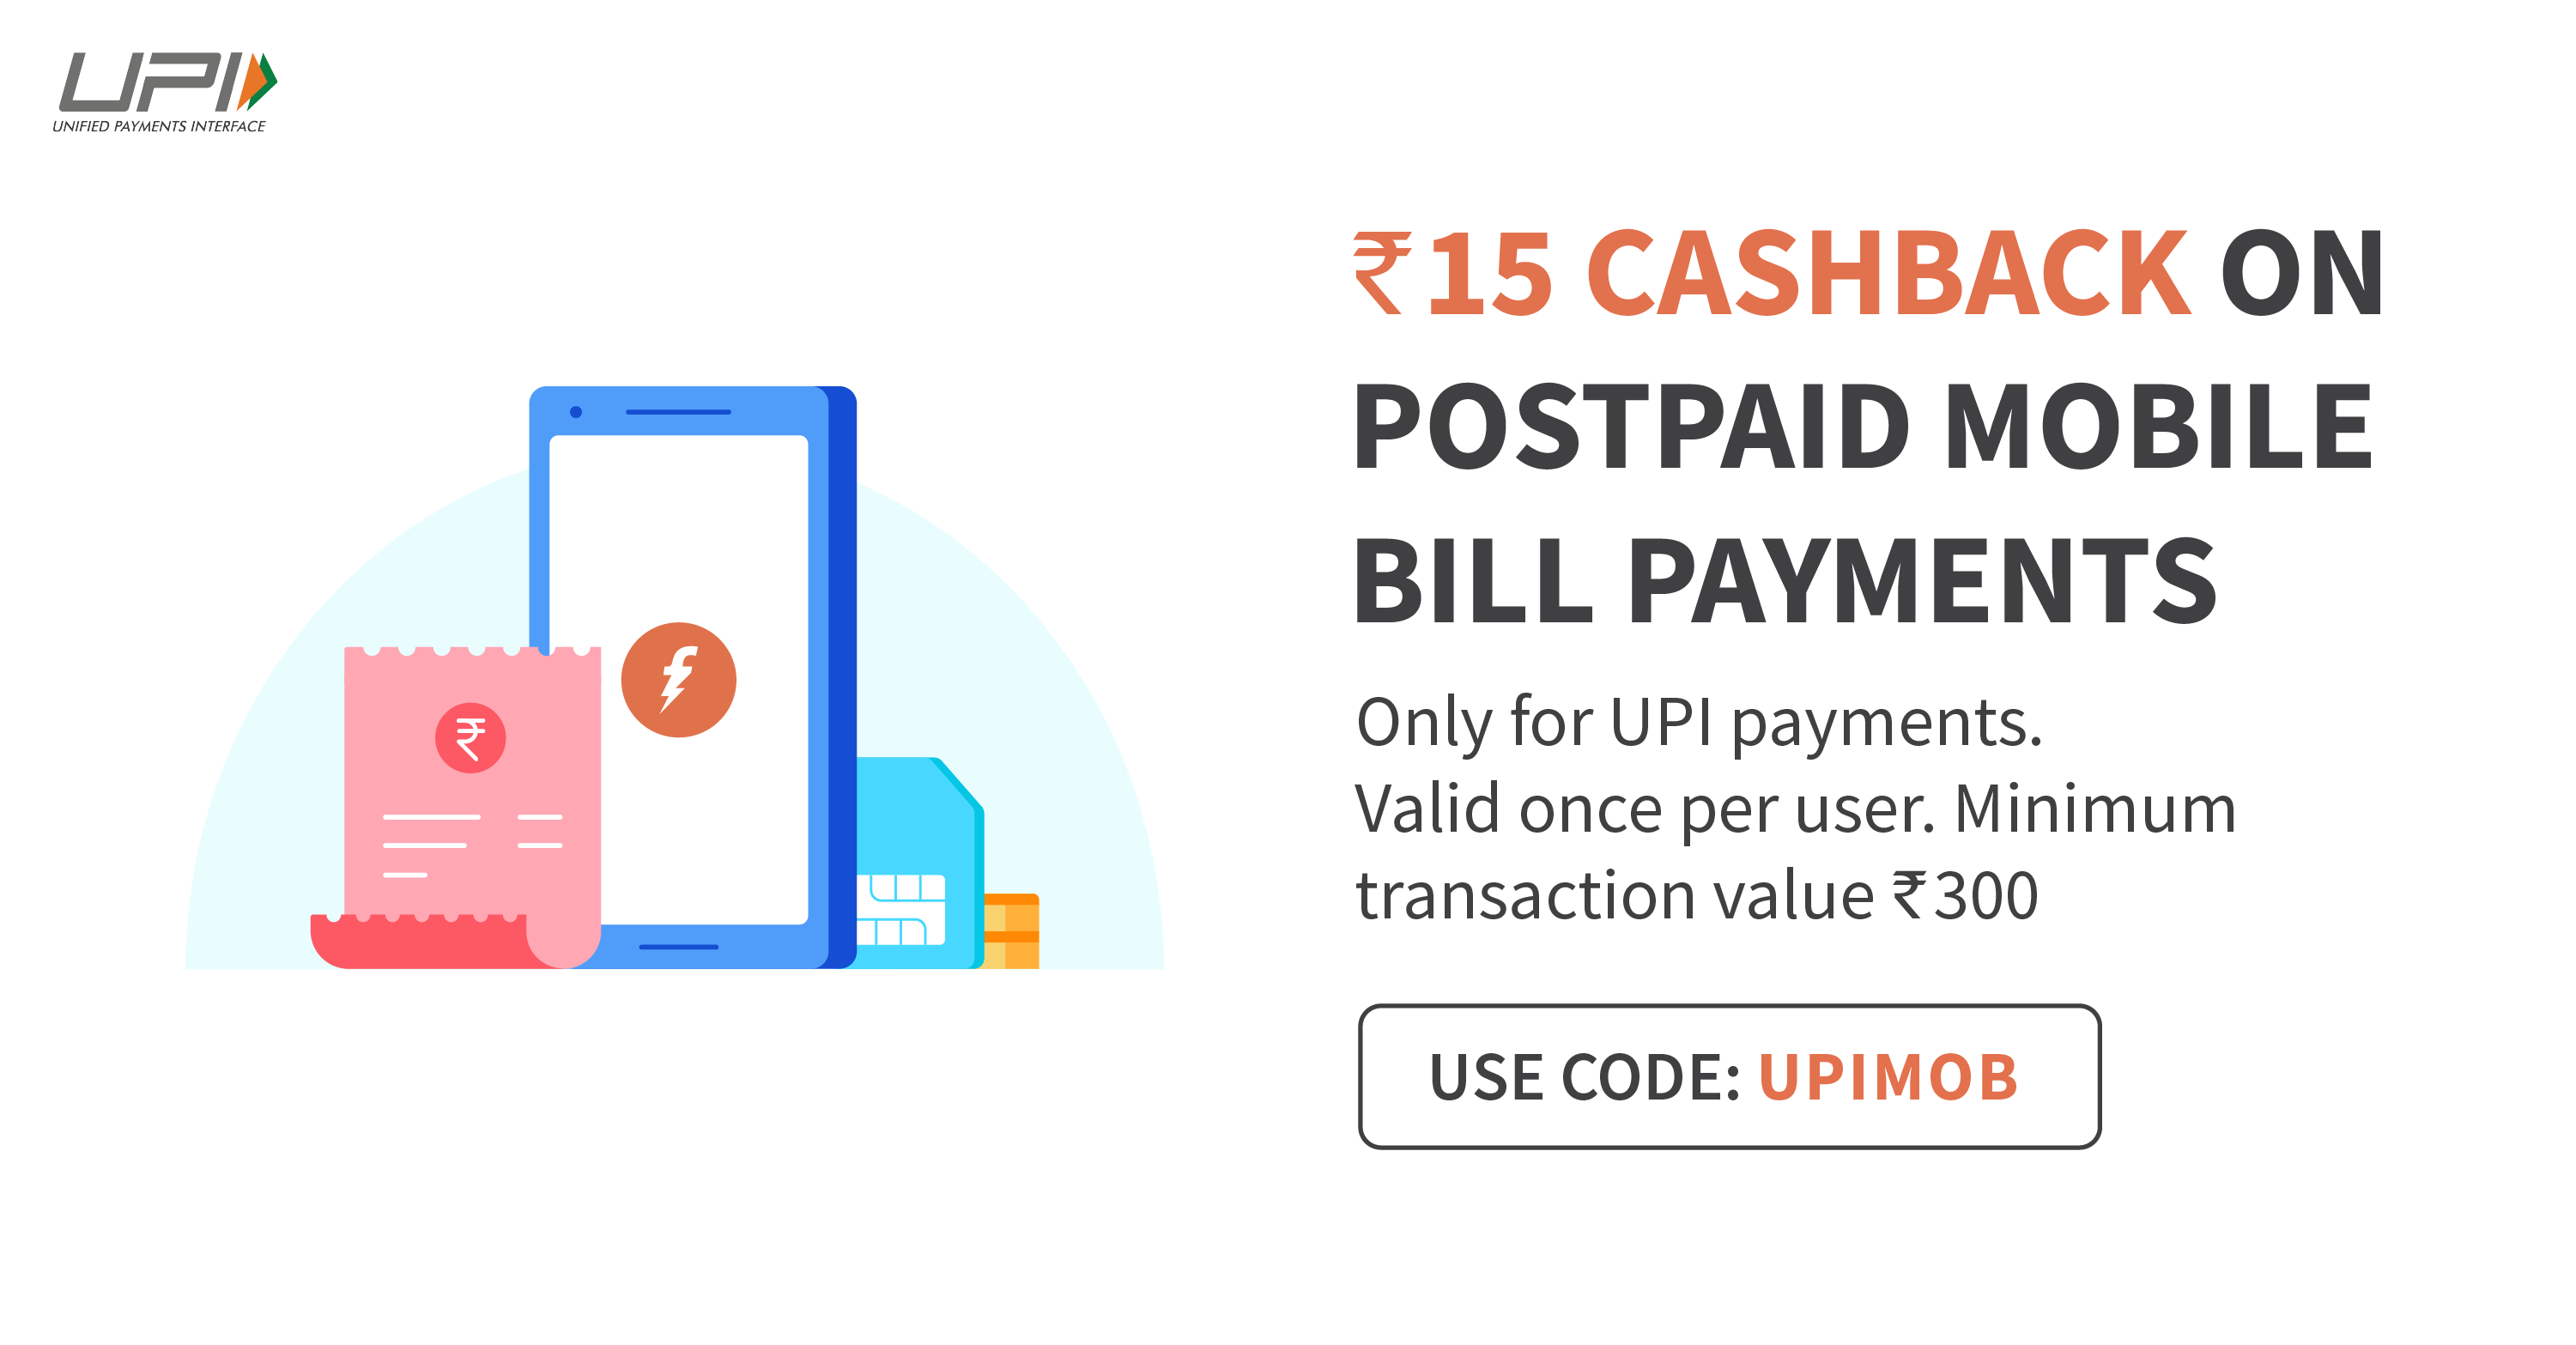 Rs.15 cashback on postpaid mobile bill payments